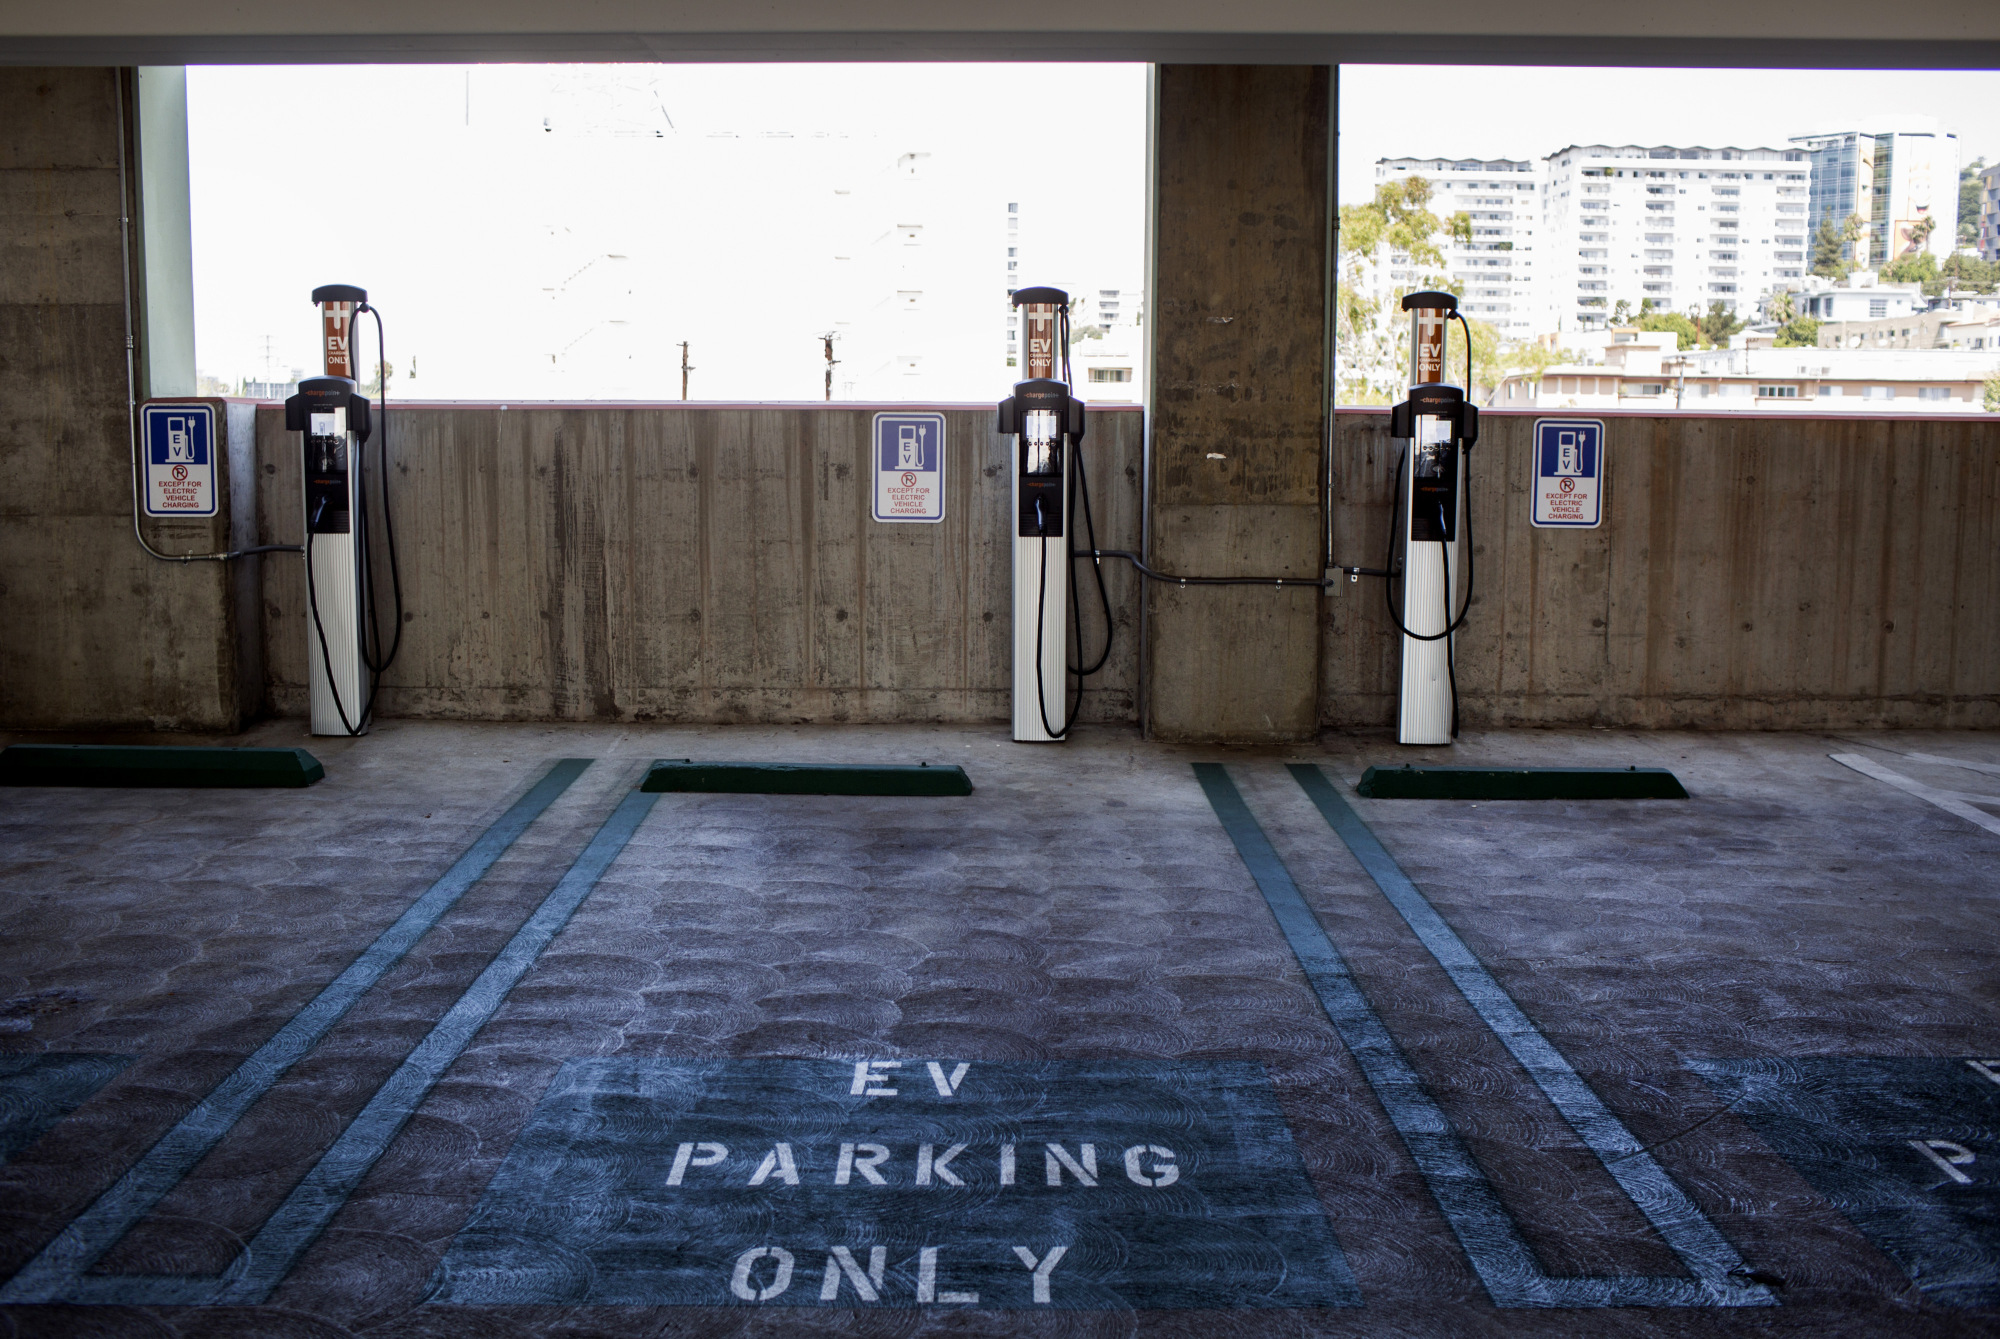 Electric vehicle (EV) charging stations&nbsp;in a municipal parking lot in Los Angeles.